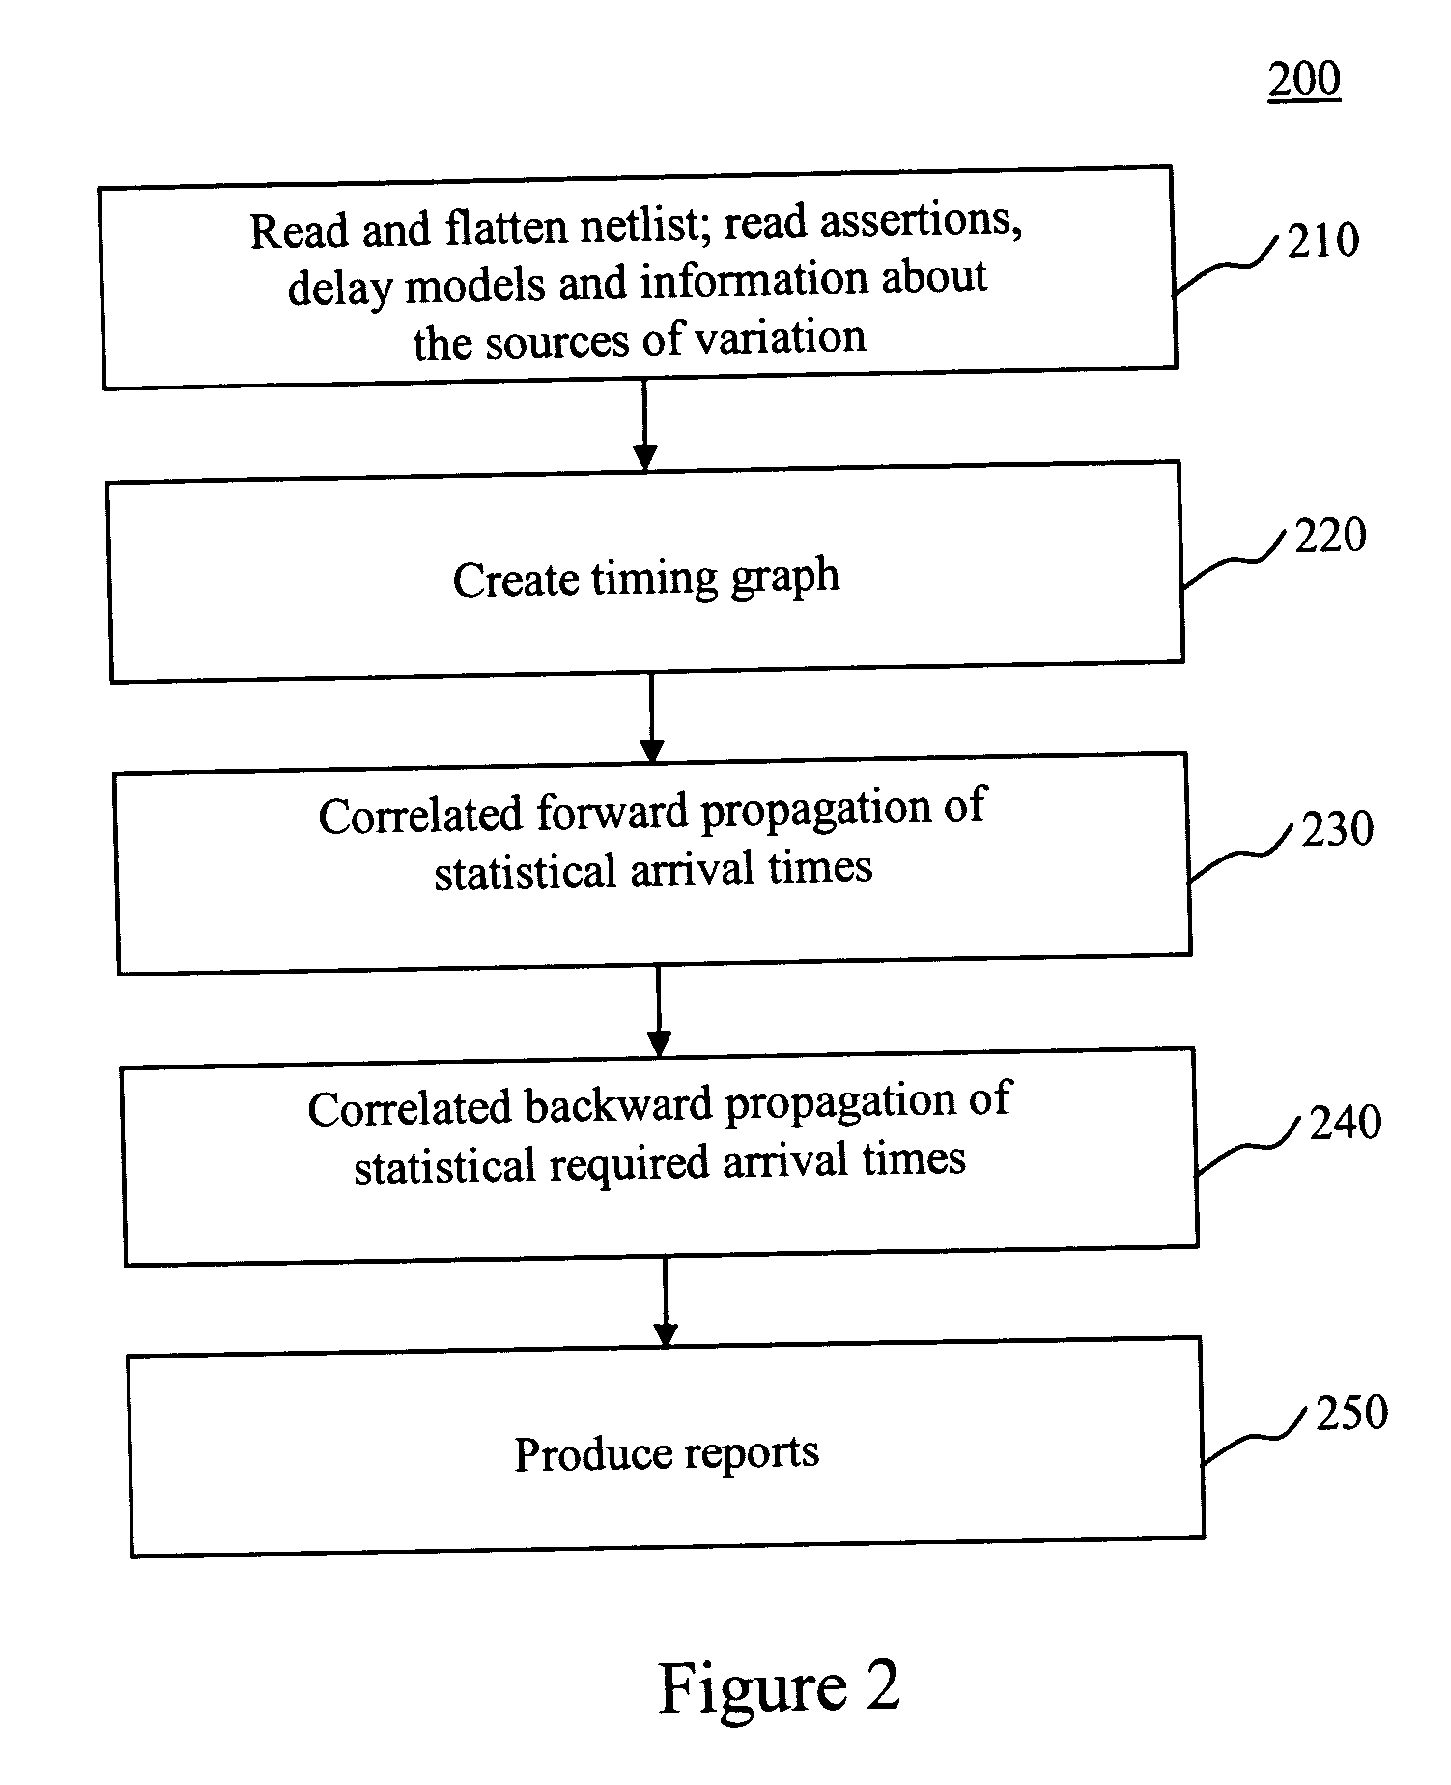 System and method for statistical timing analysis of digital circuits